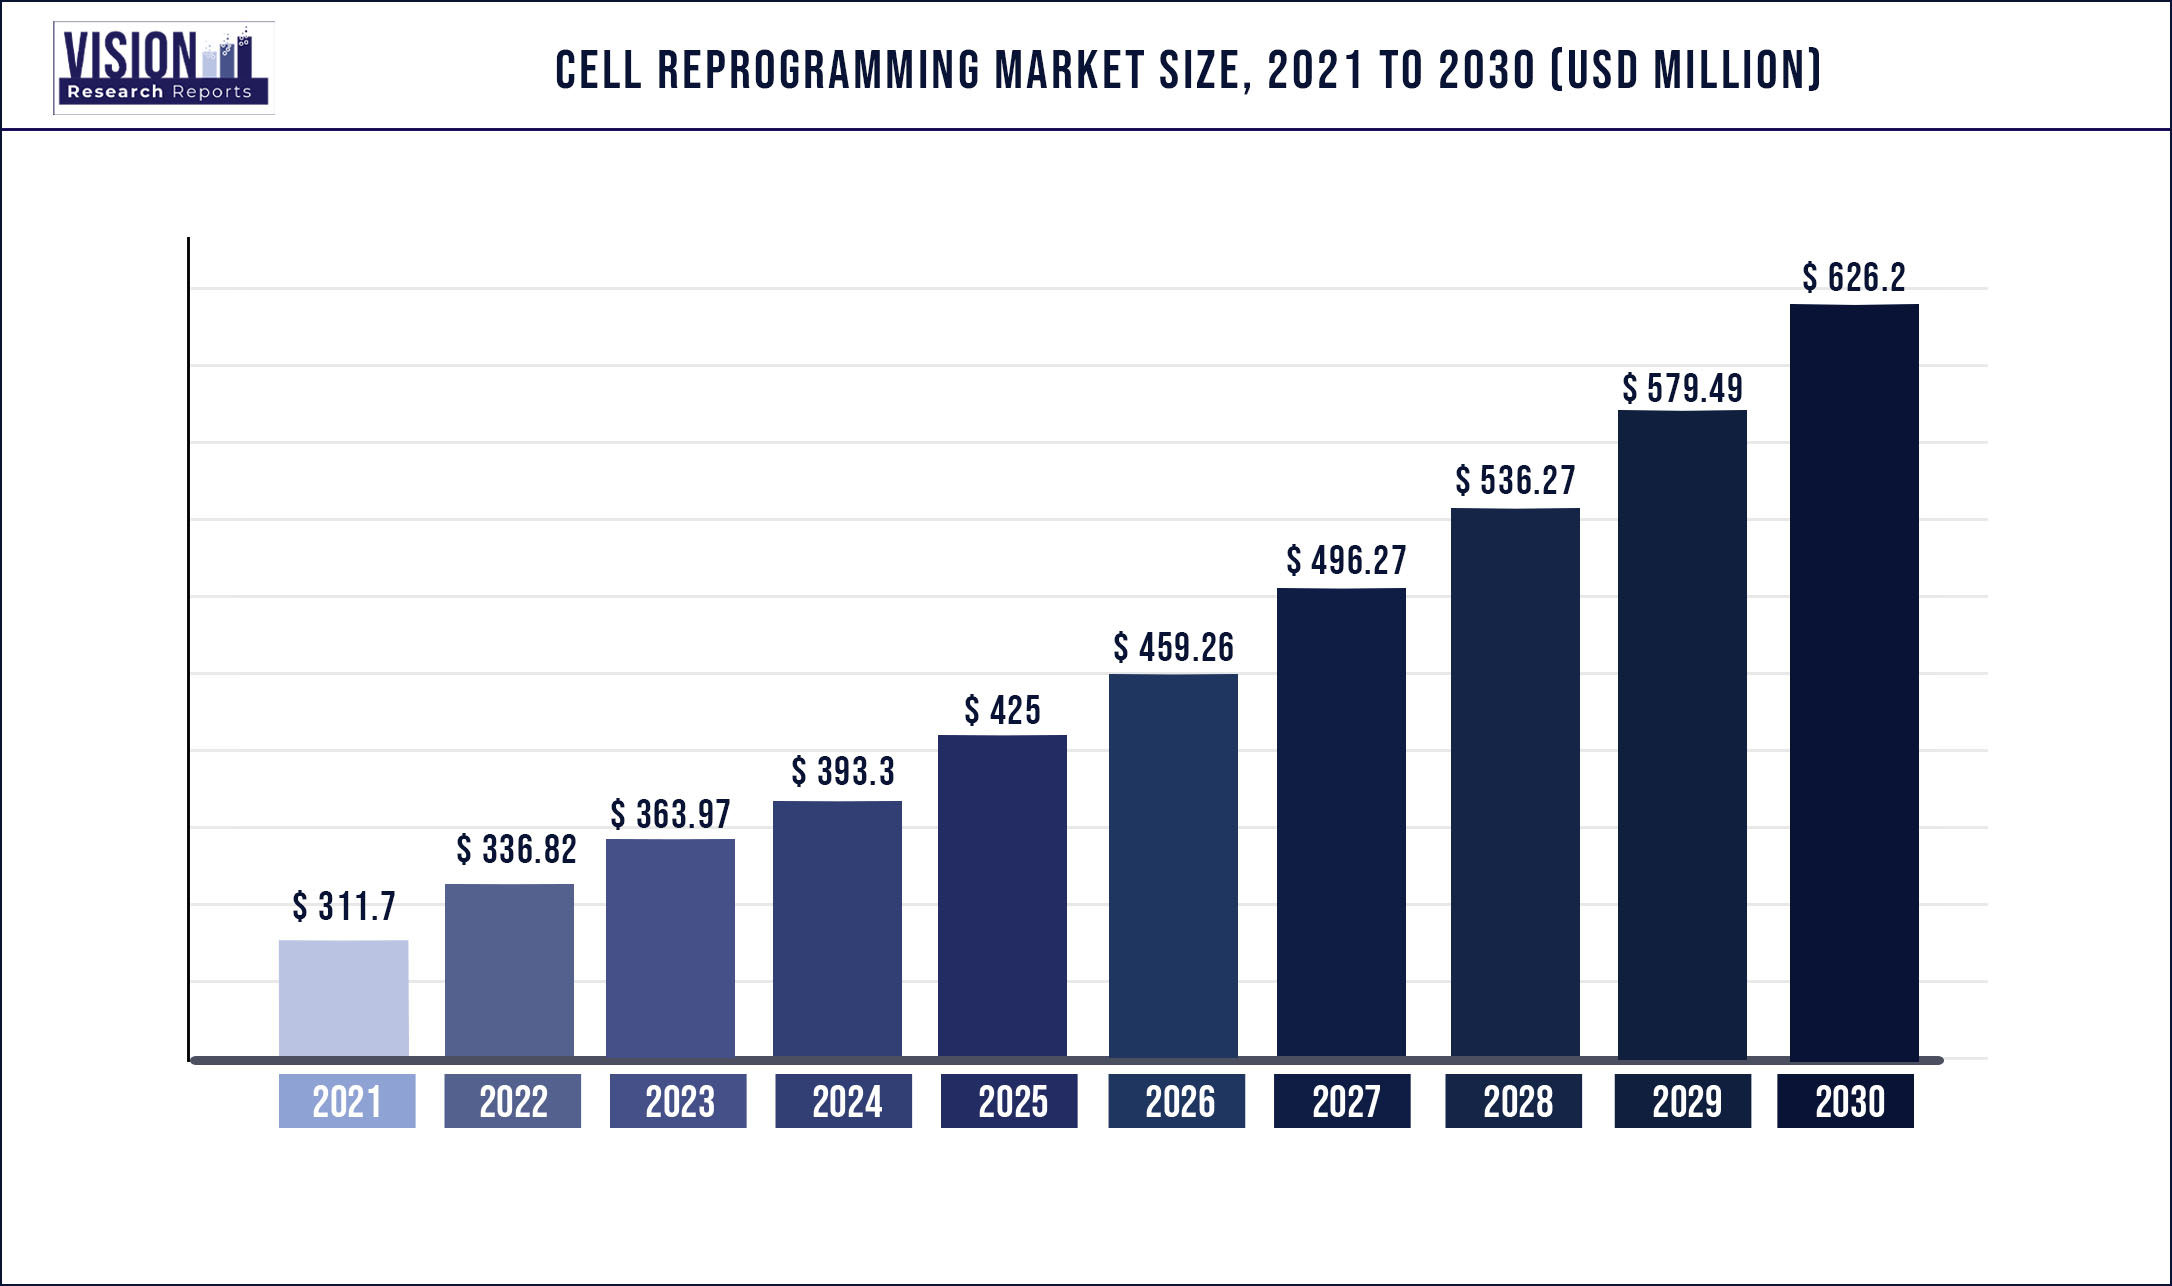 Cell Reprogramming Market Size 2021 to 2030